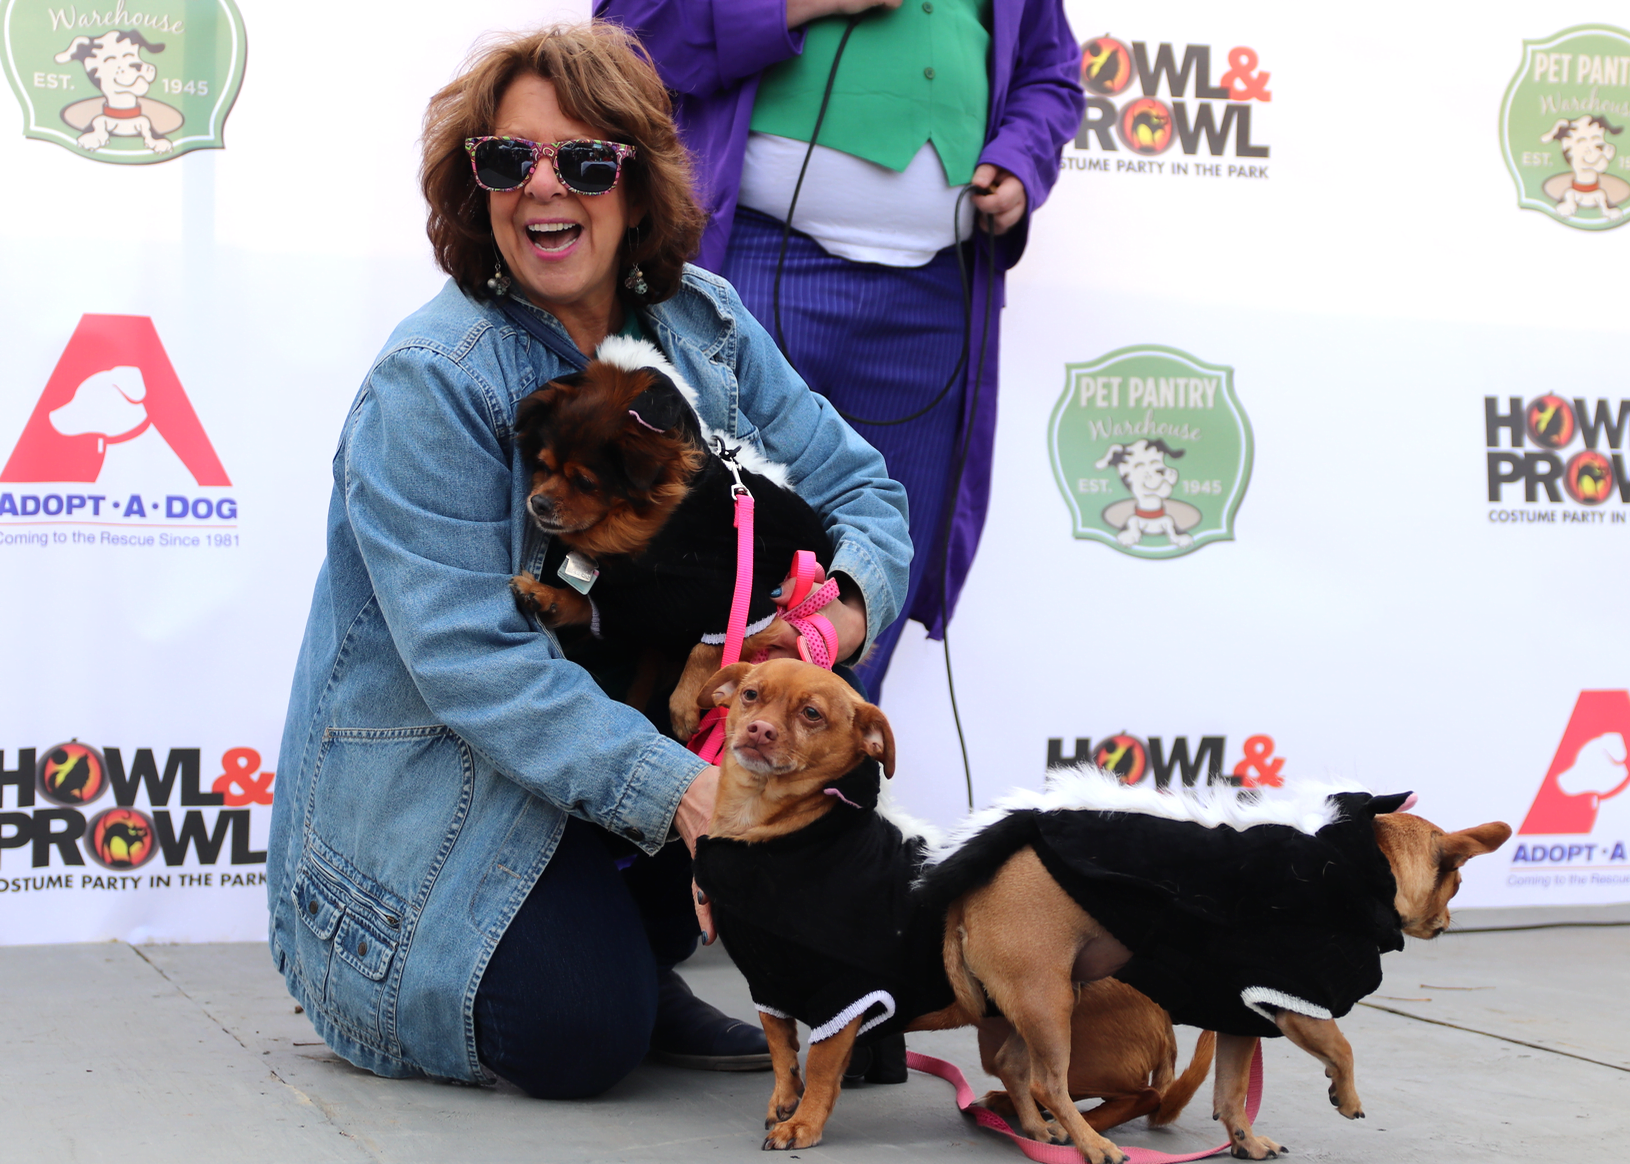 "Three skunks" at the 12th annual Howl & Prowl on Greenwich Avenue. Nov 3, 2019 Photo: Leslie Yager